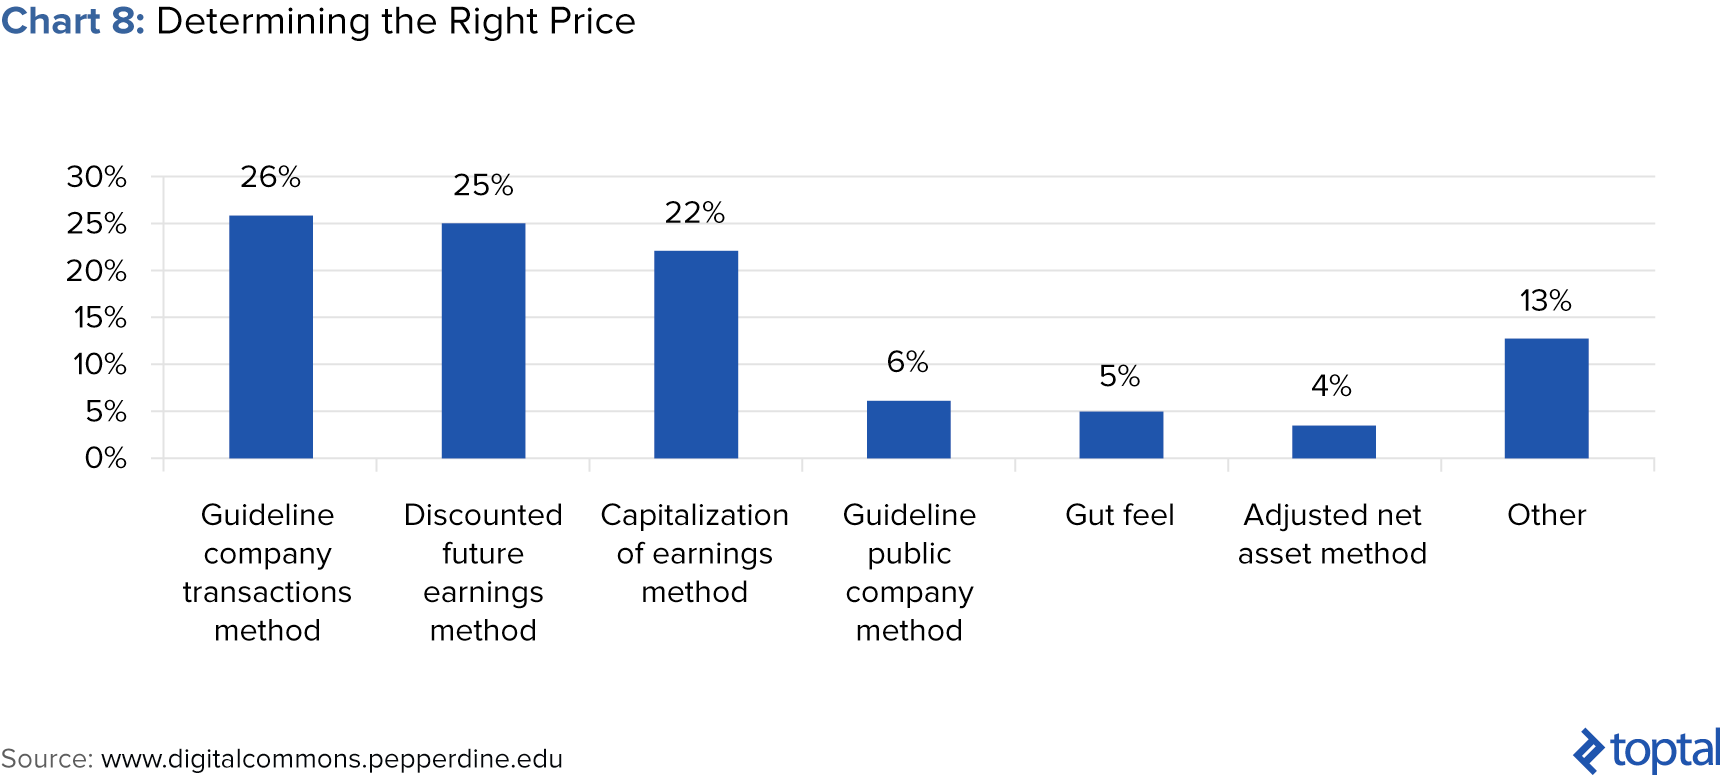 Chart 8: Determining the Right Price